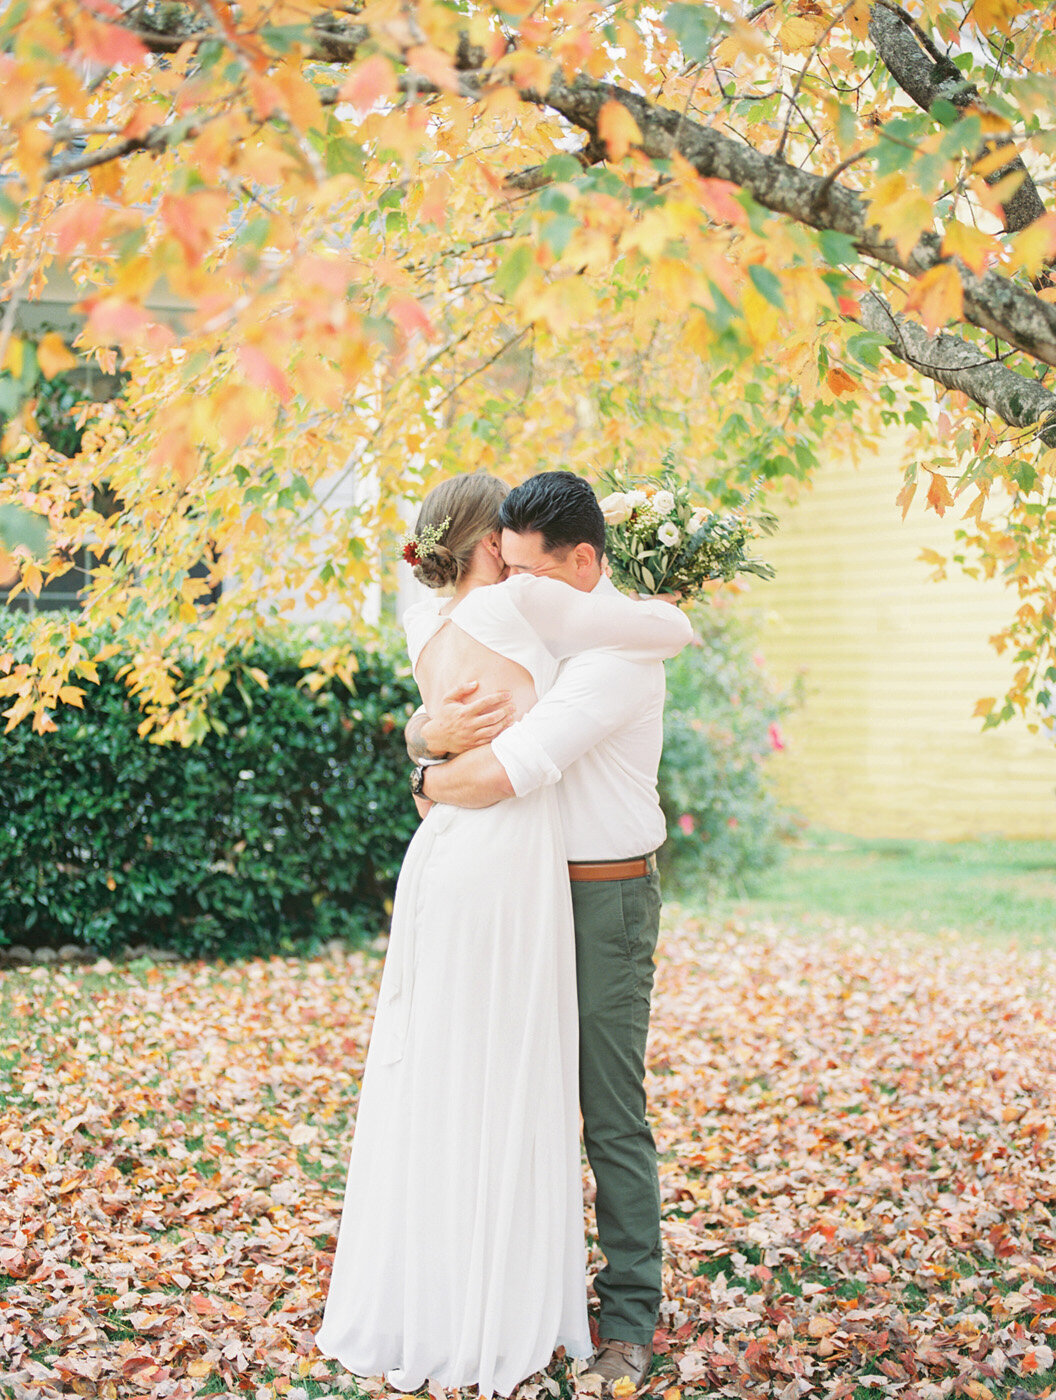 Raleigh Event Elopement Photographer | Jessica Agee Photography - 008